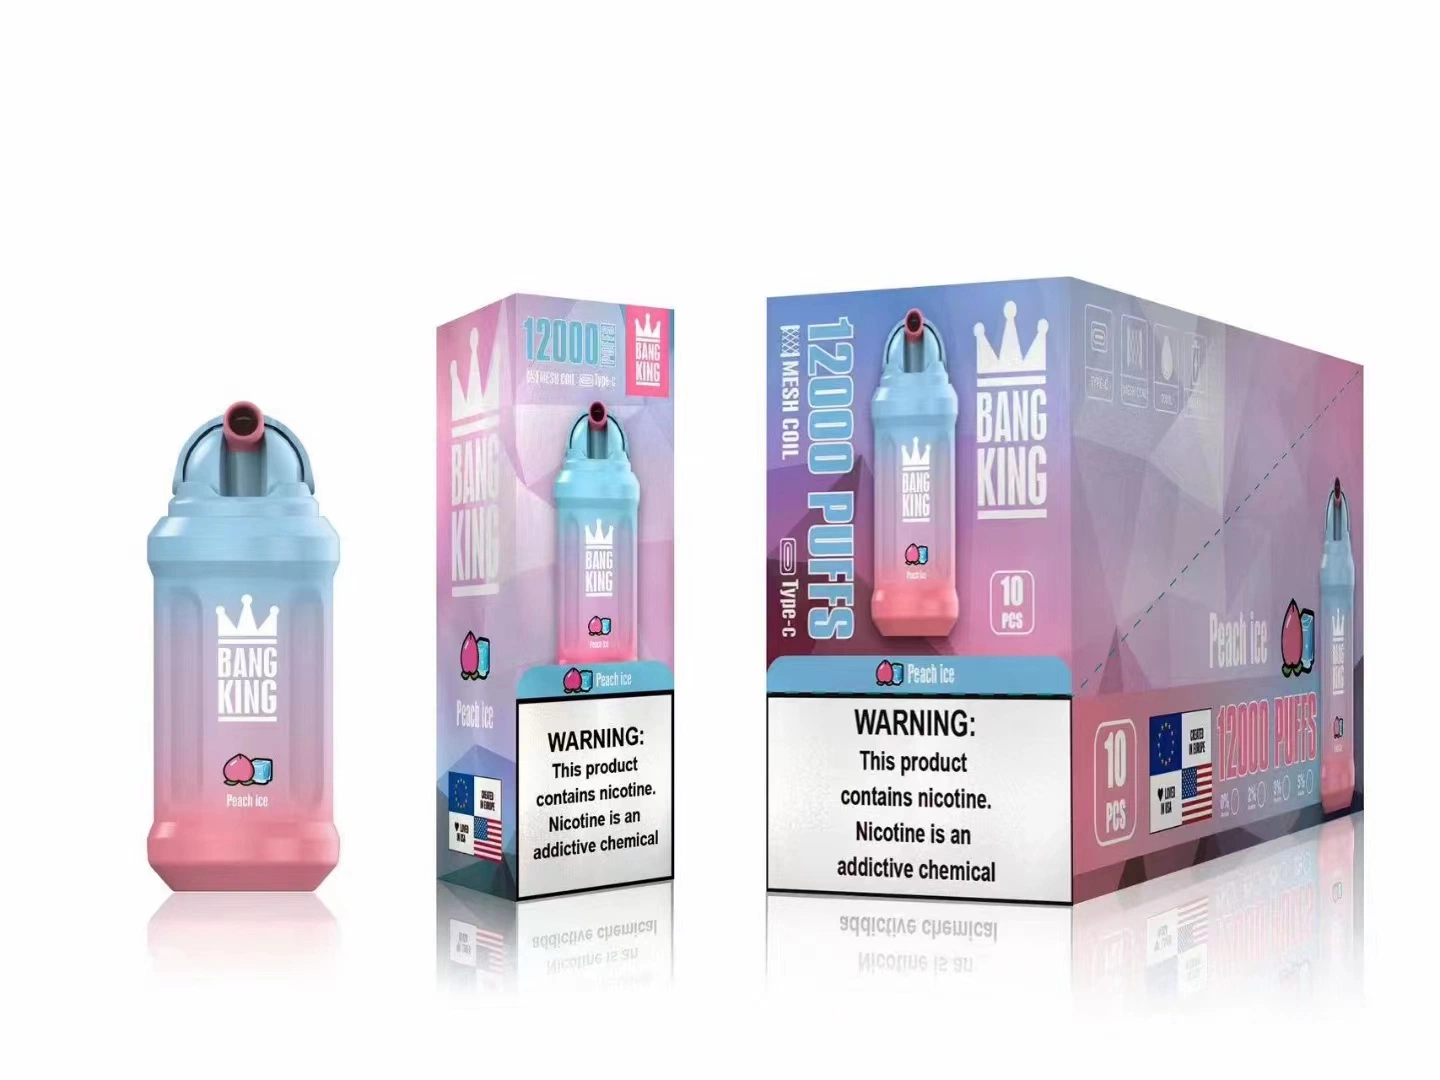 Cheap Wholesale/Supplier Price Puff Distributors Vapes Pod Pen Bang King 12000 Puffs Disposable/Chargeable Vape in Stock